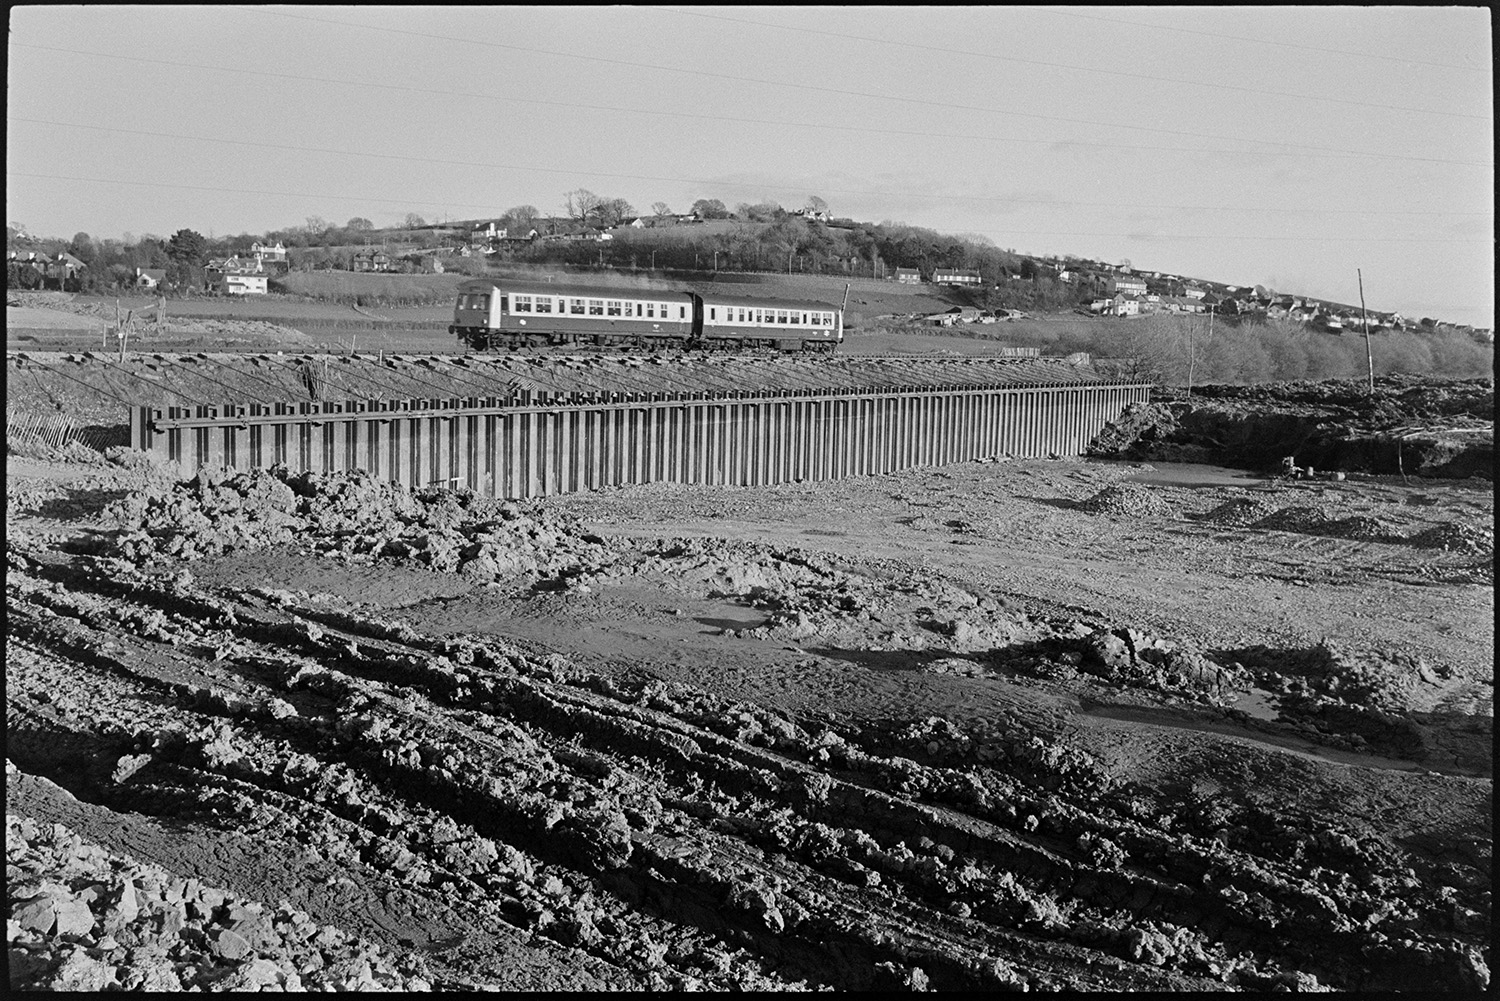 Engineers working on new river bridge for motorway link road.
[A train on the Barnstaple to Bideford railway line passing between the River Taw and the preparatory work involved in the construction of a bridge over the river, near Barnstaple,]